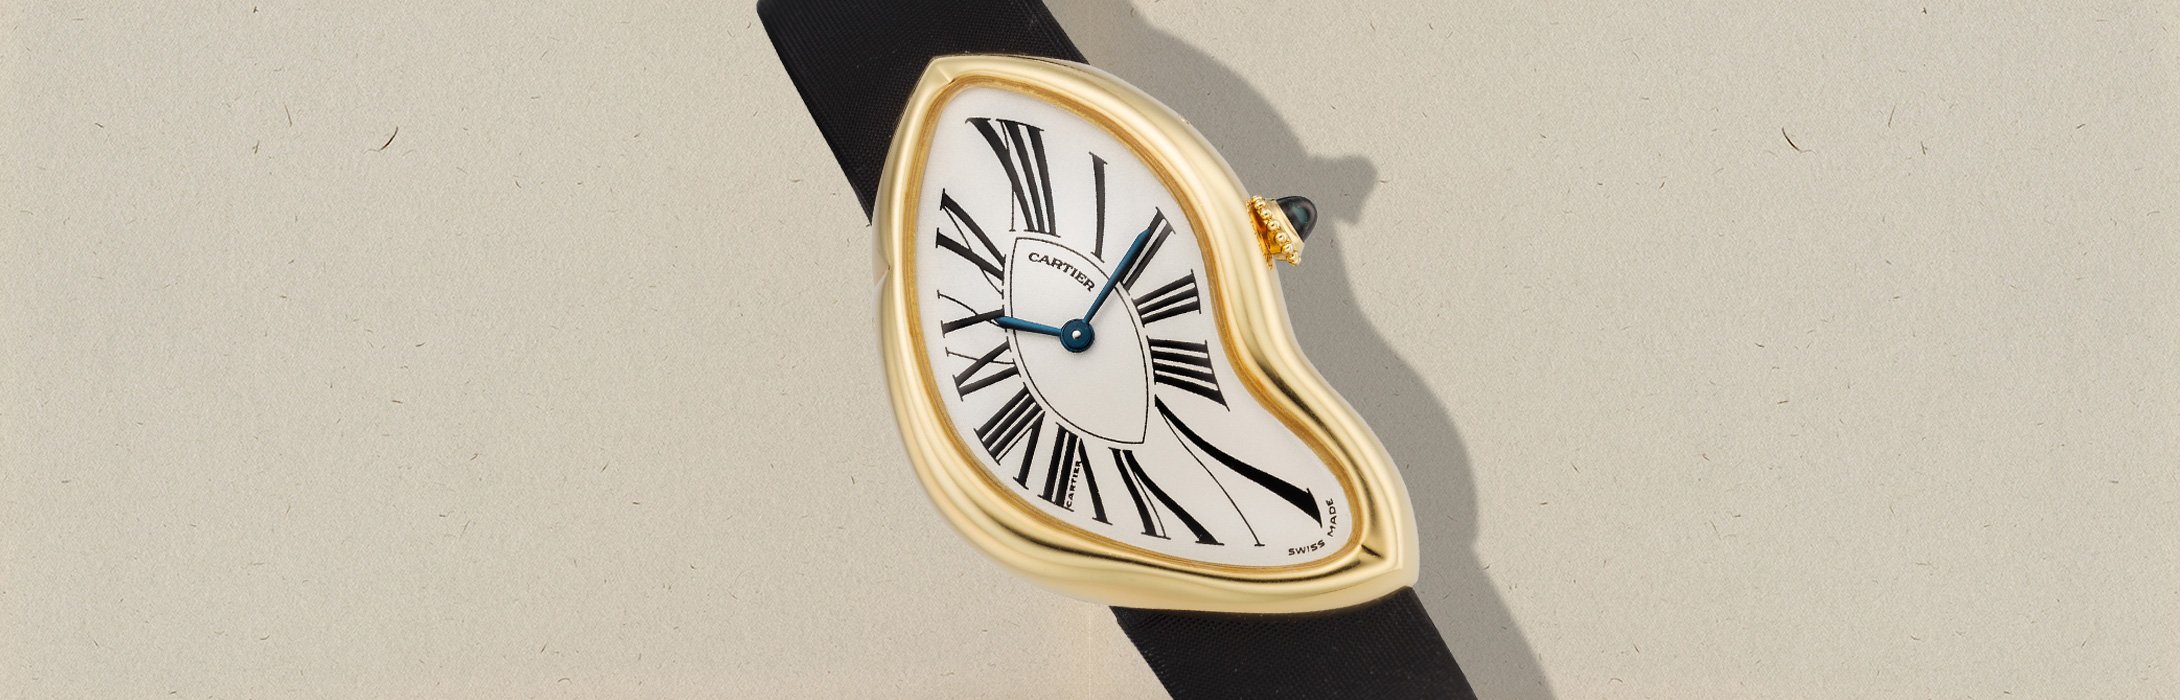 The Cartier Crash Watch: A Curious Piece of Art and History